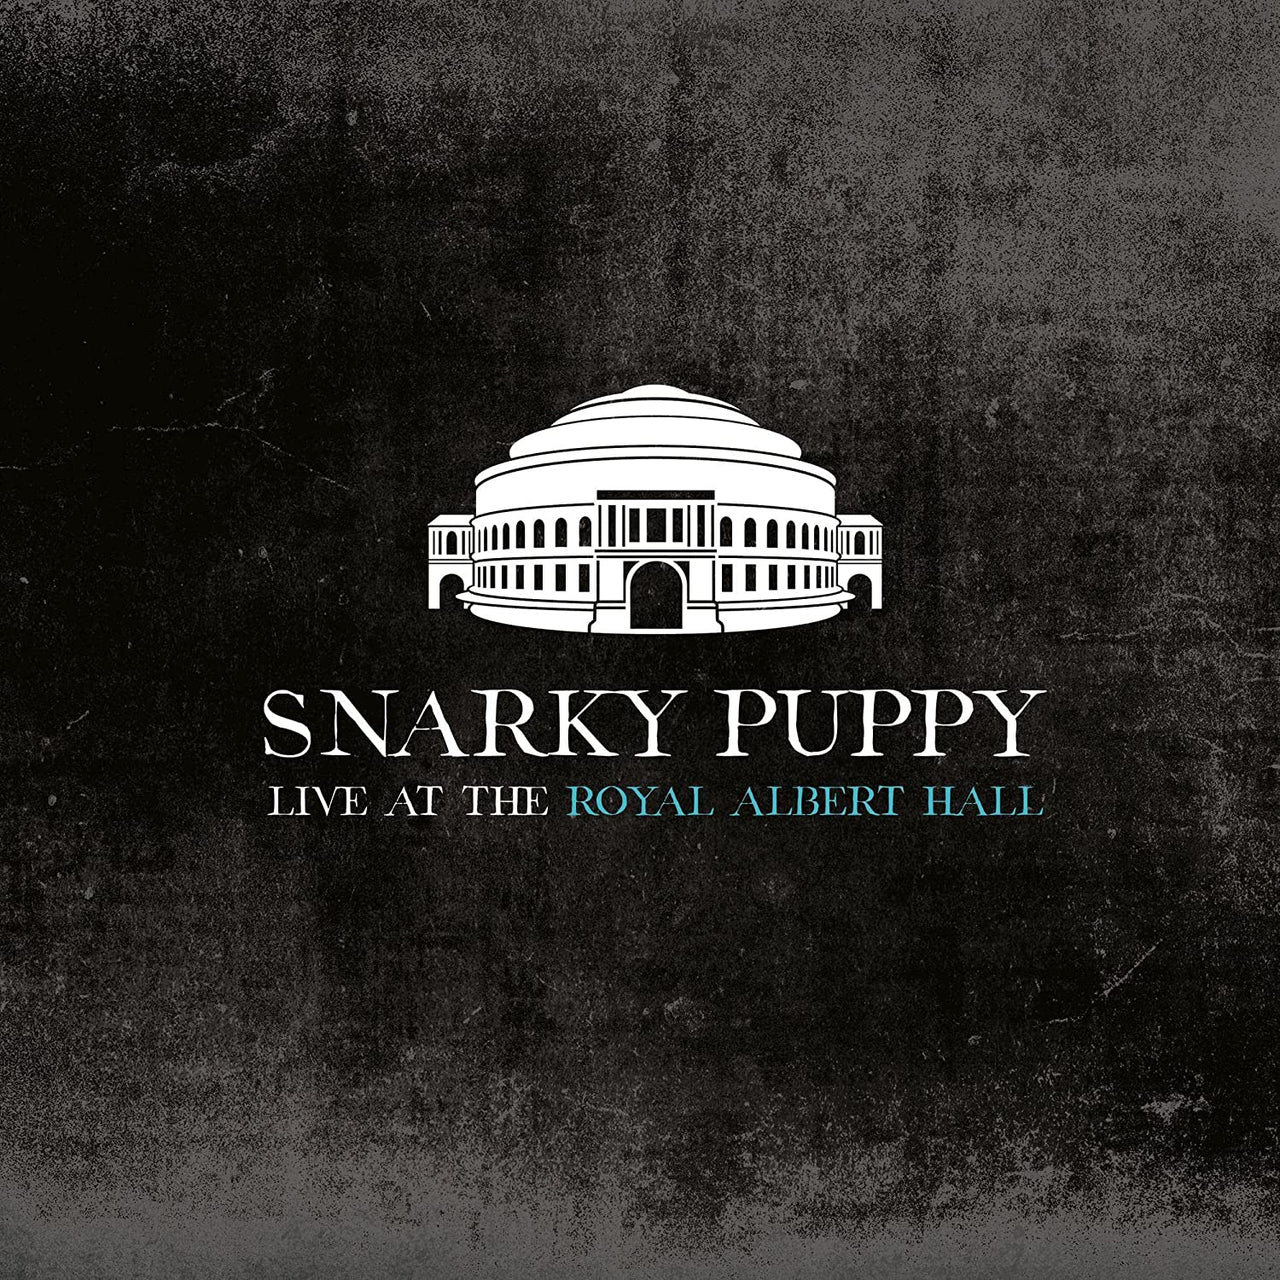 snarky puppy live at the royal albert hall vinyl record on the jungle floor